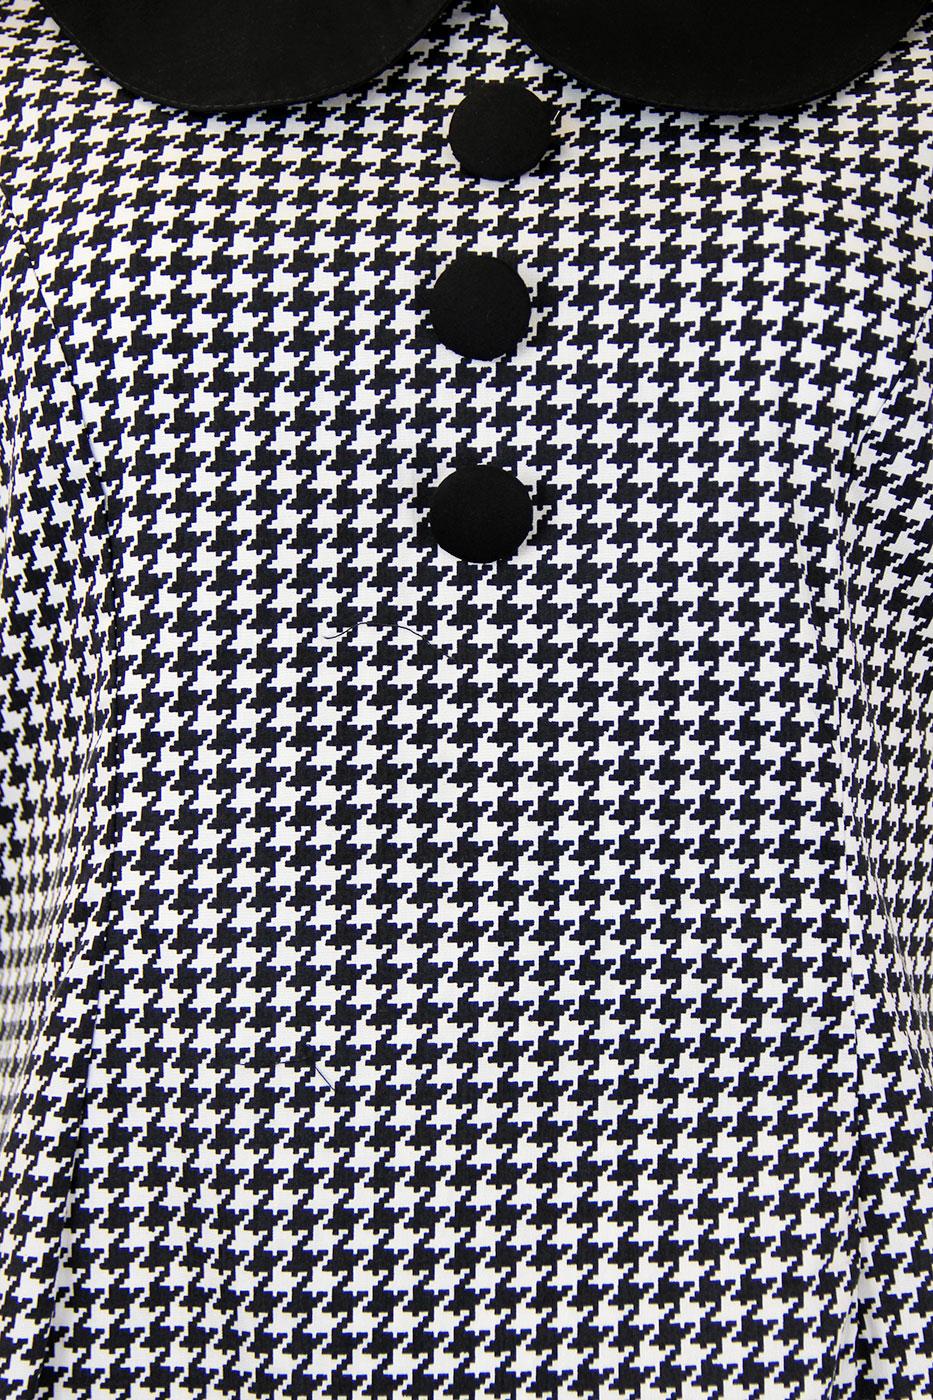 black and white dogtooth dress